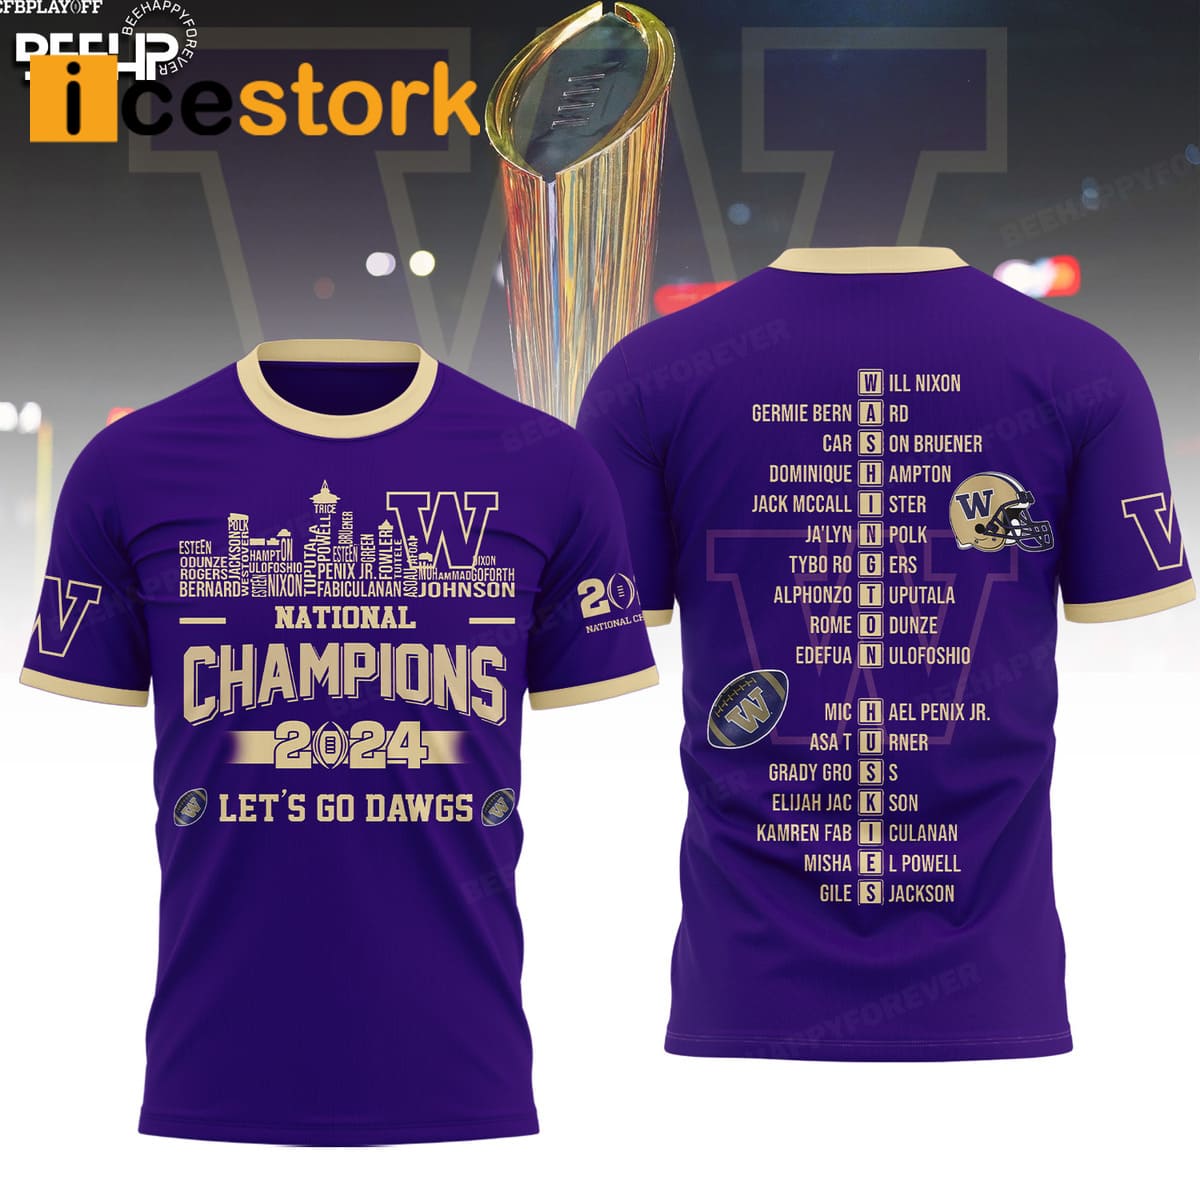 Dawgs 2024 National Champions Let's Go Dawgs Shirt - Icestork